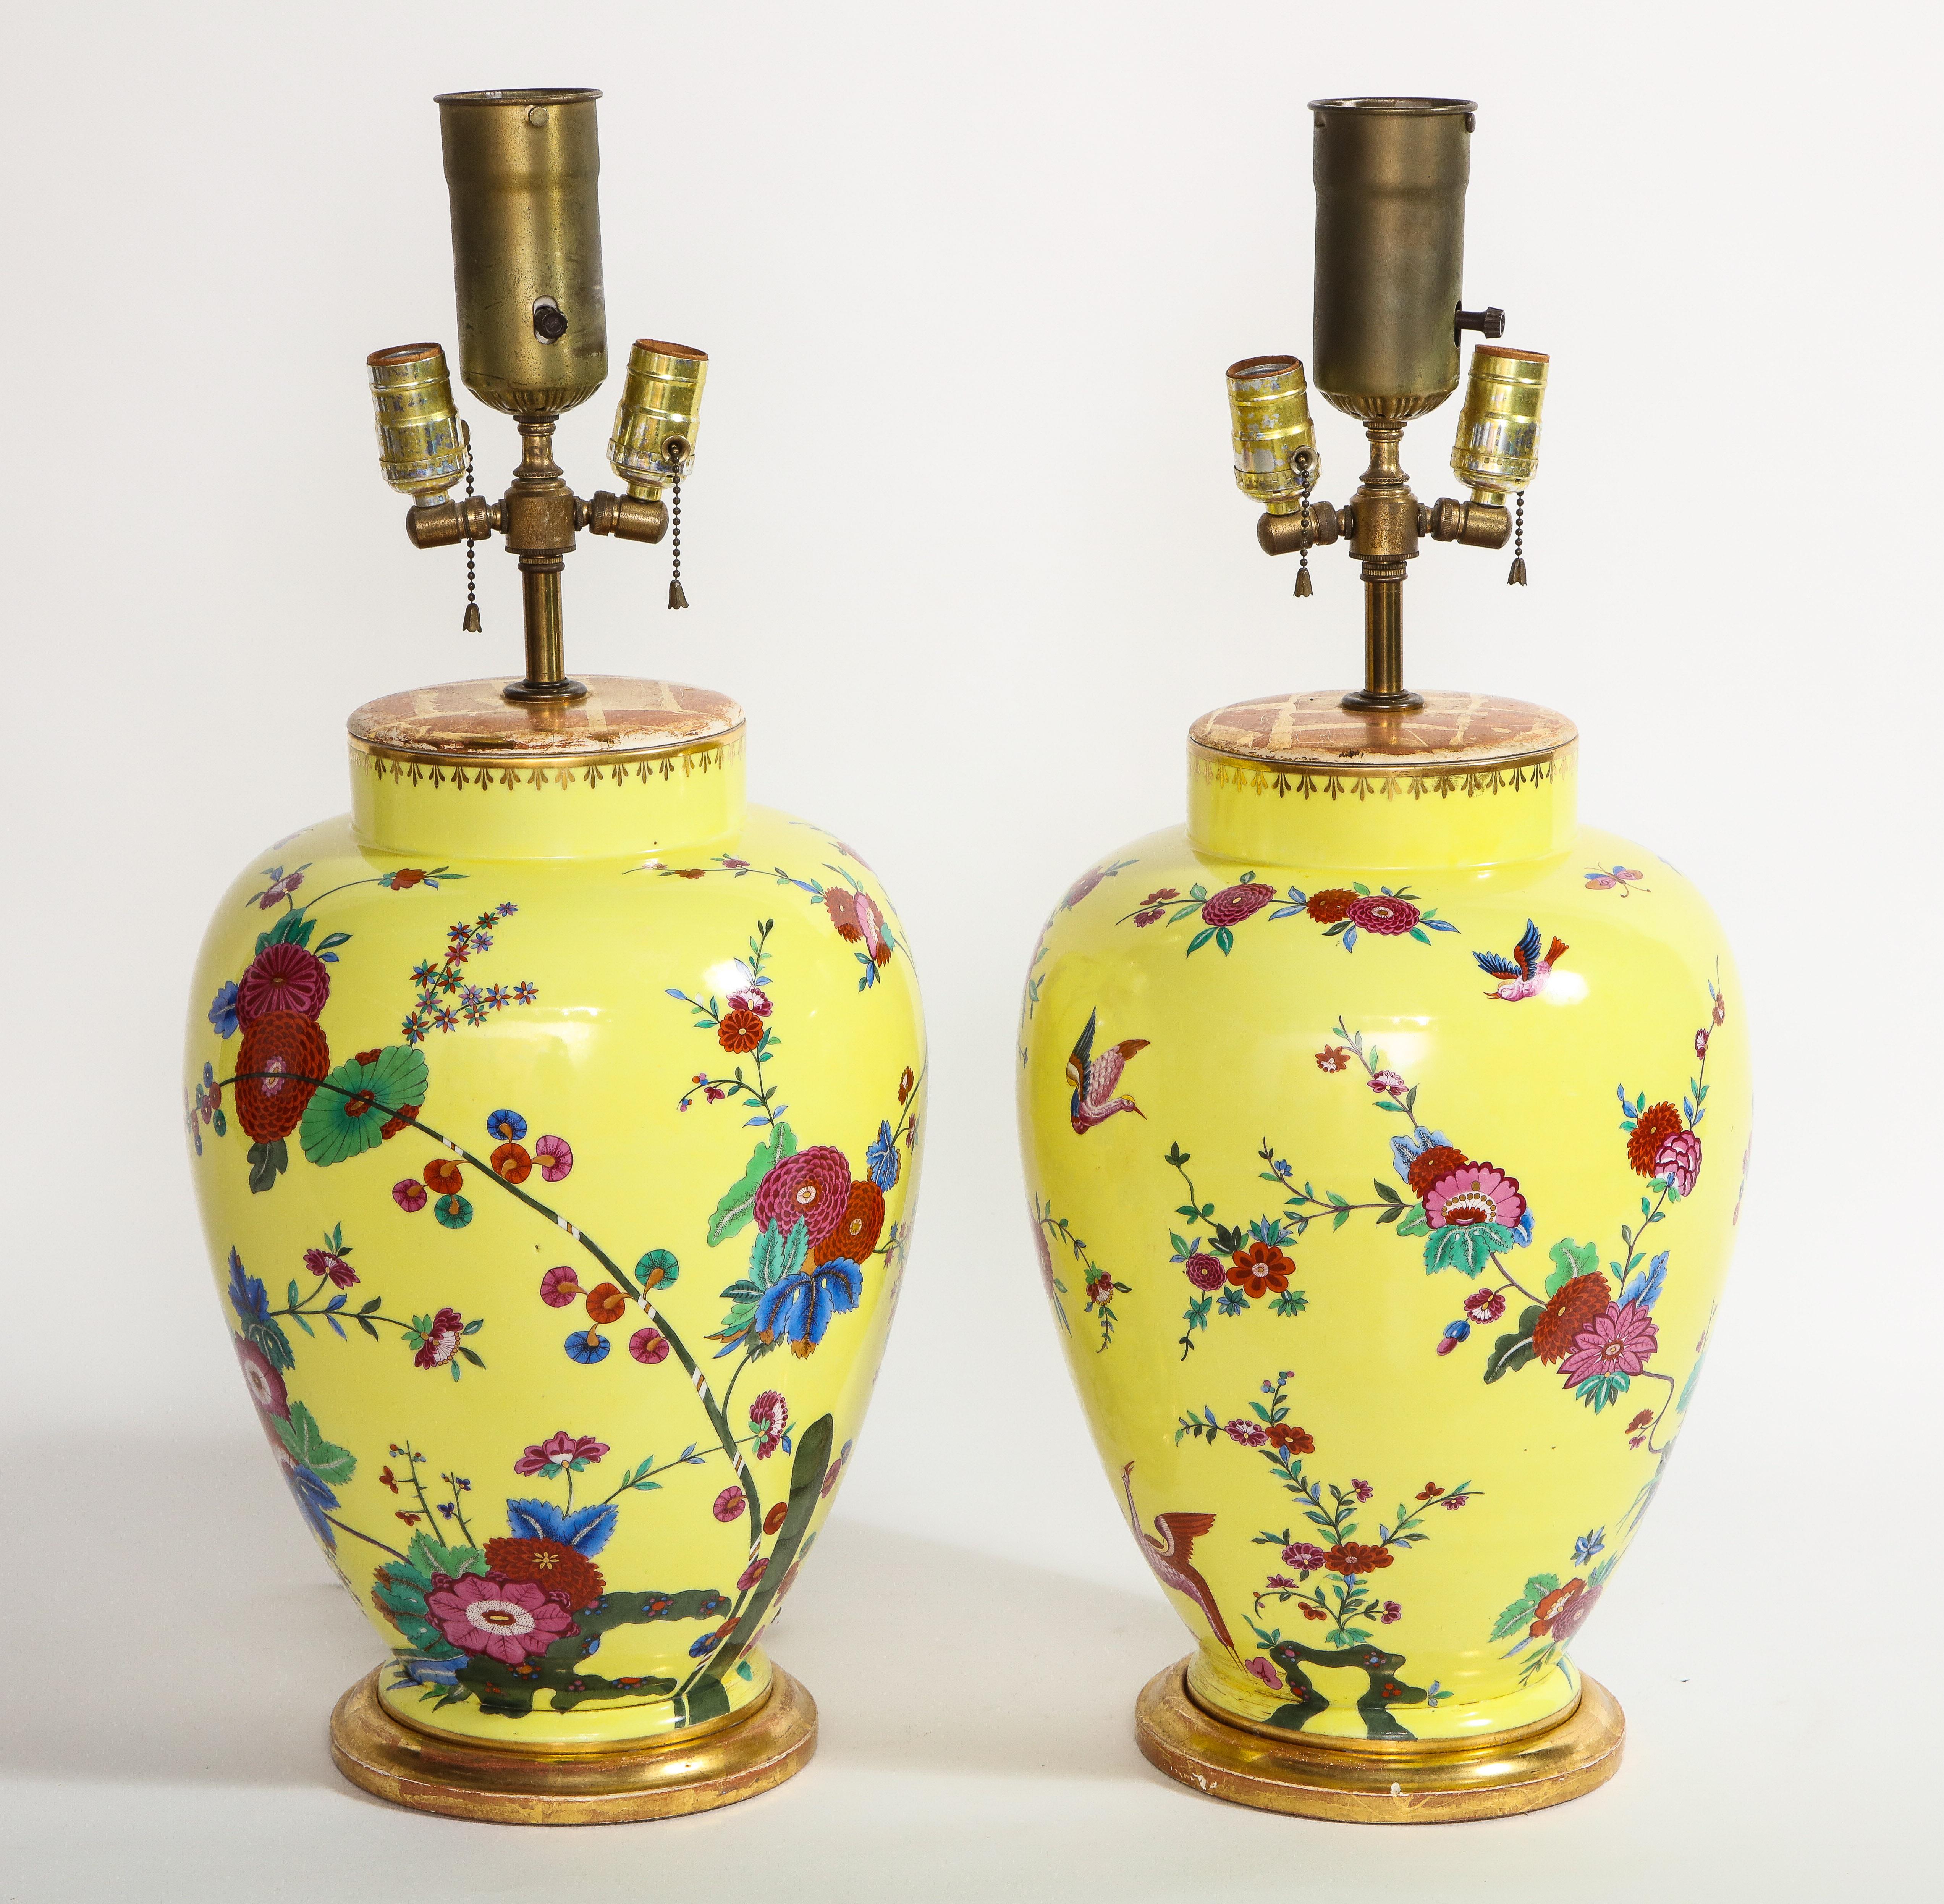 A pair of beautiful yellow ground German porcelain vases mounted as lamps hand painted with flowers, bird and insect decorations. Each of these lamps are beautifully hand painted with a gorgeous yellow ground and further detailed with colorful